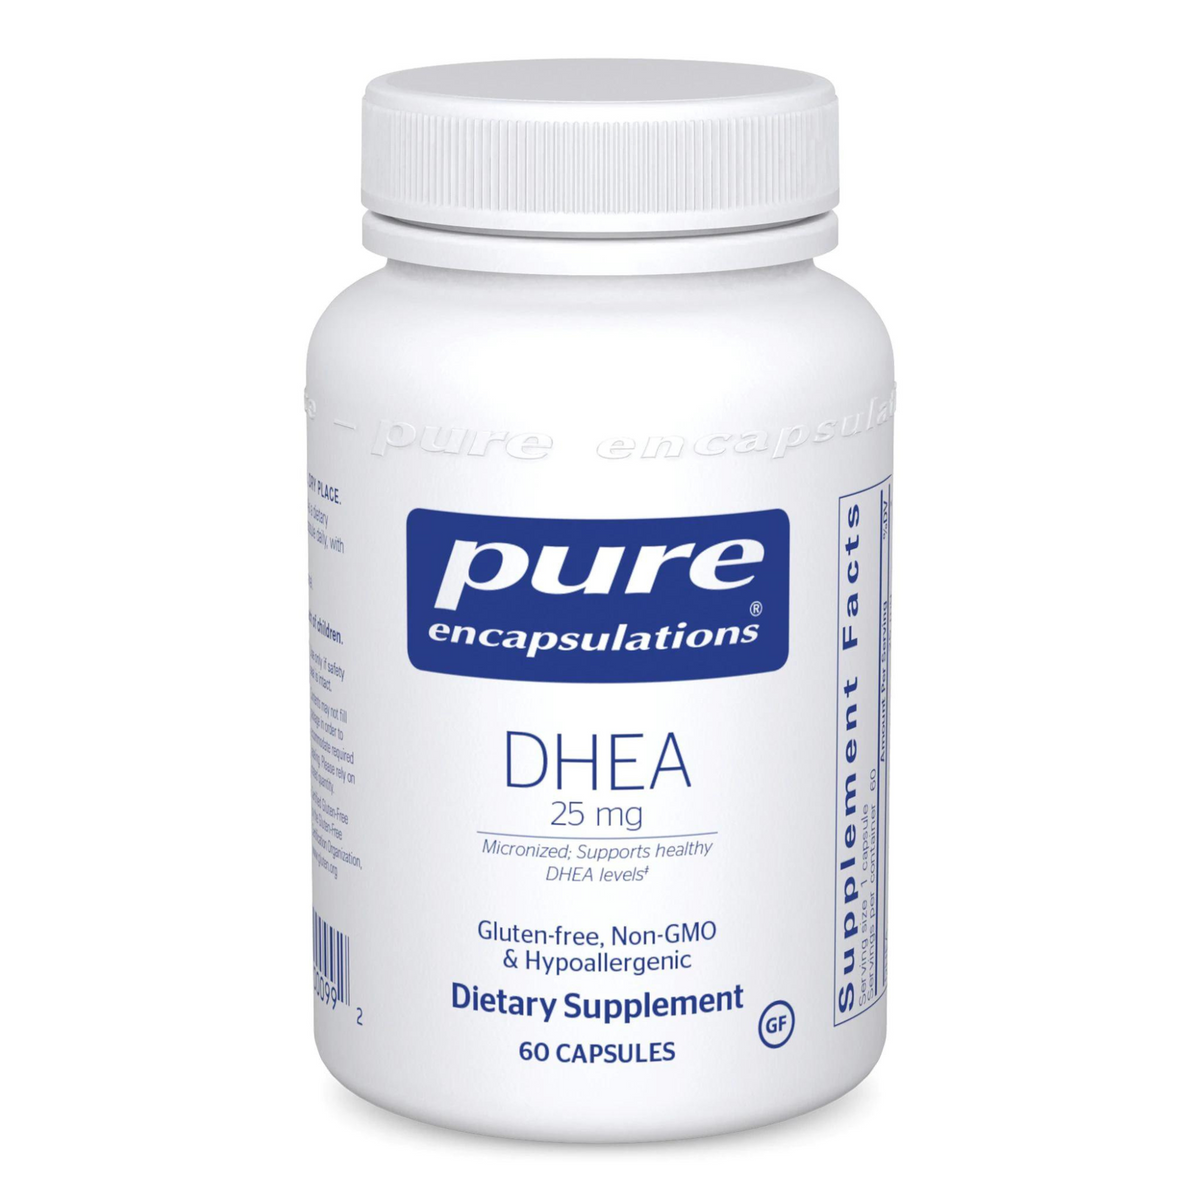 Primary Image of DHEA 25 mg. Capsules (60 count)